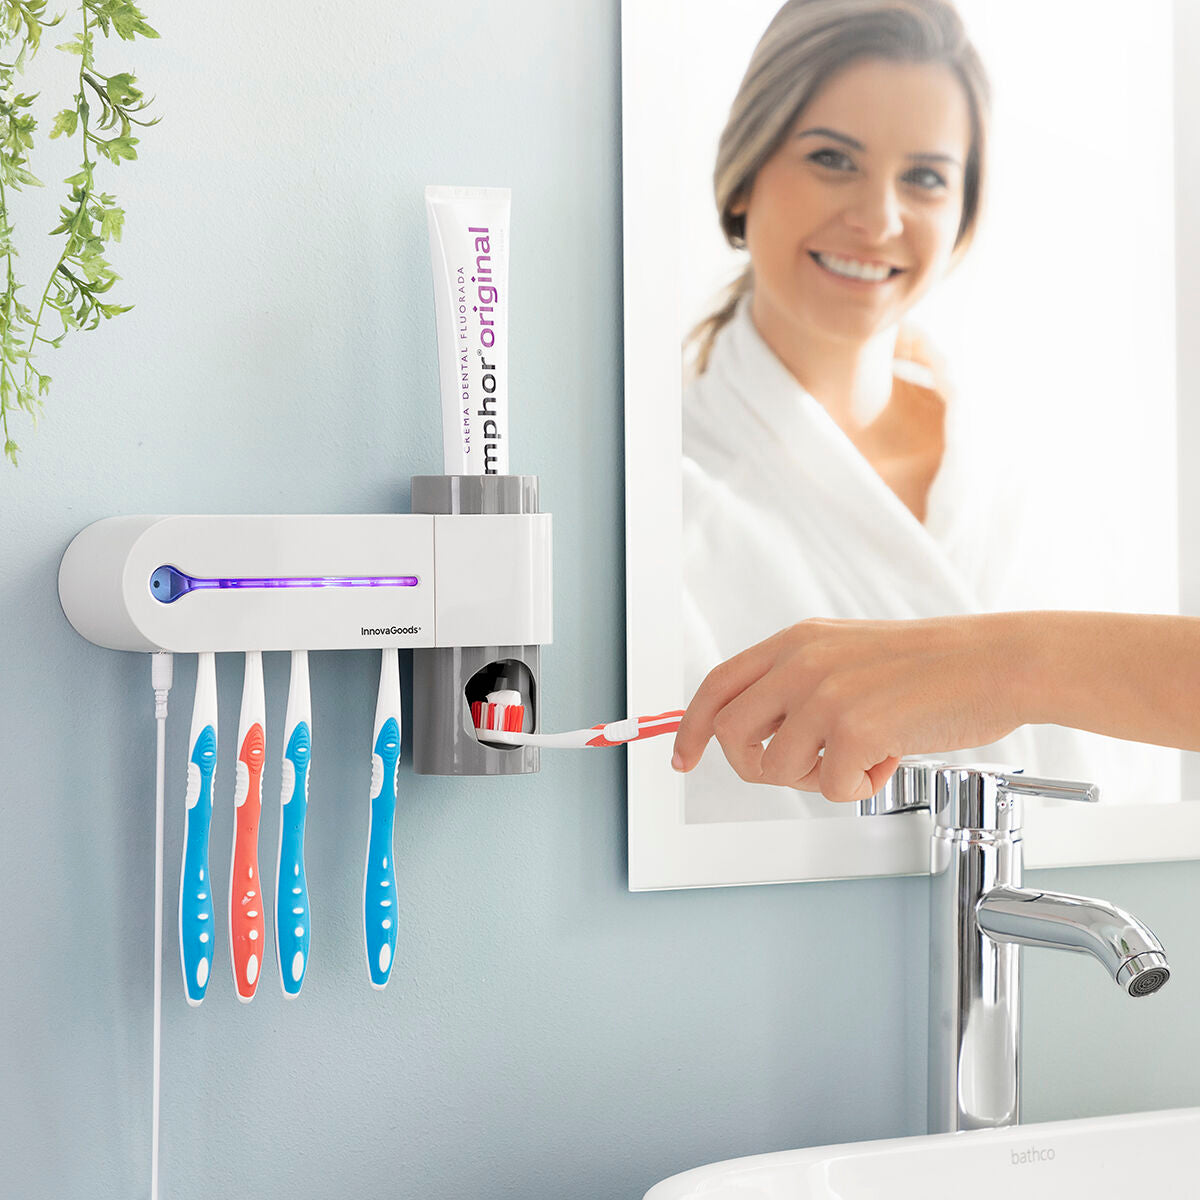 UV Toothbrush Steriliser with Stand and Toothpaste Dispenser Smiluv